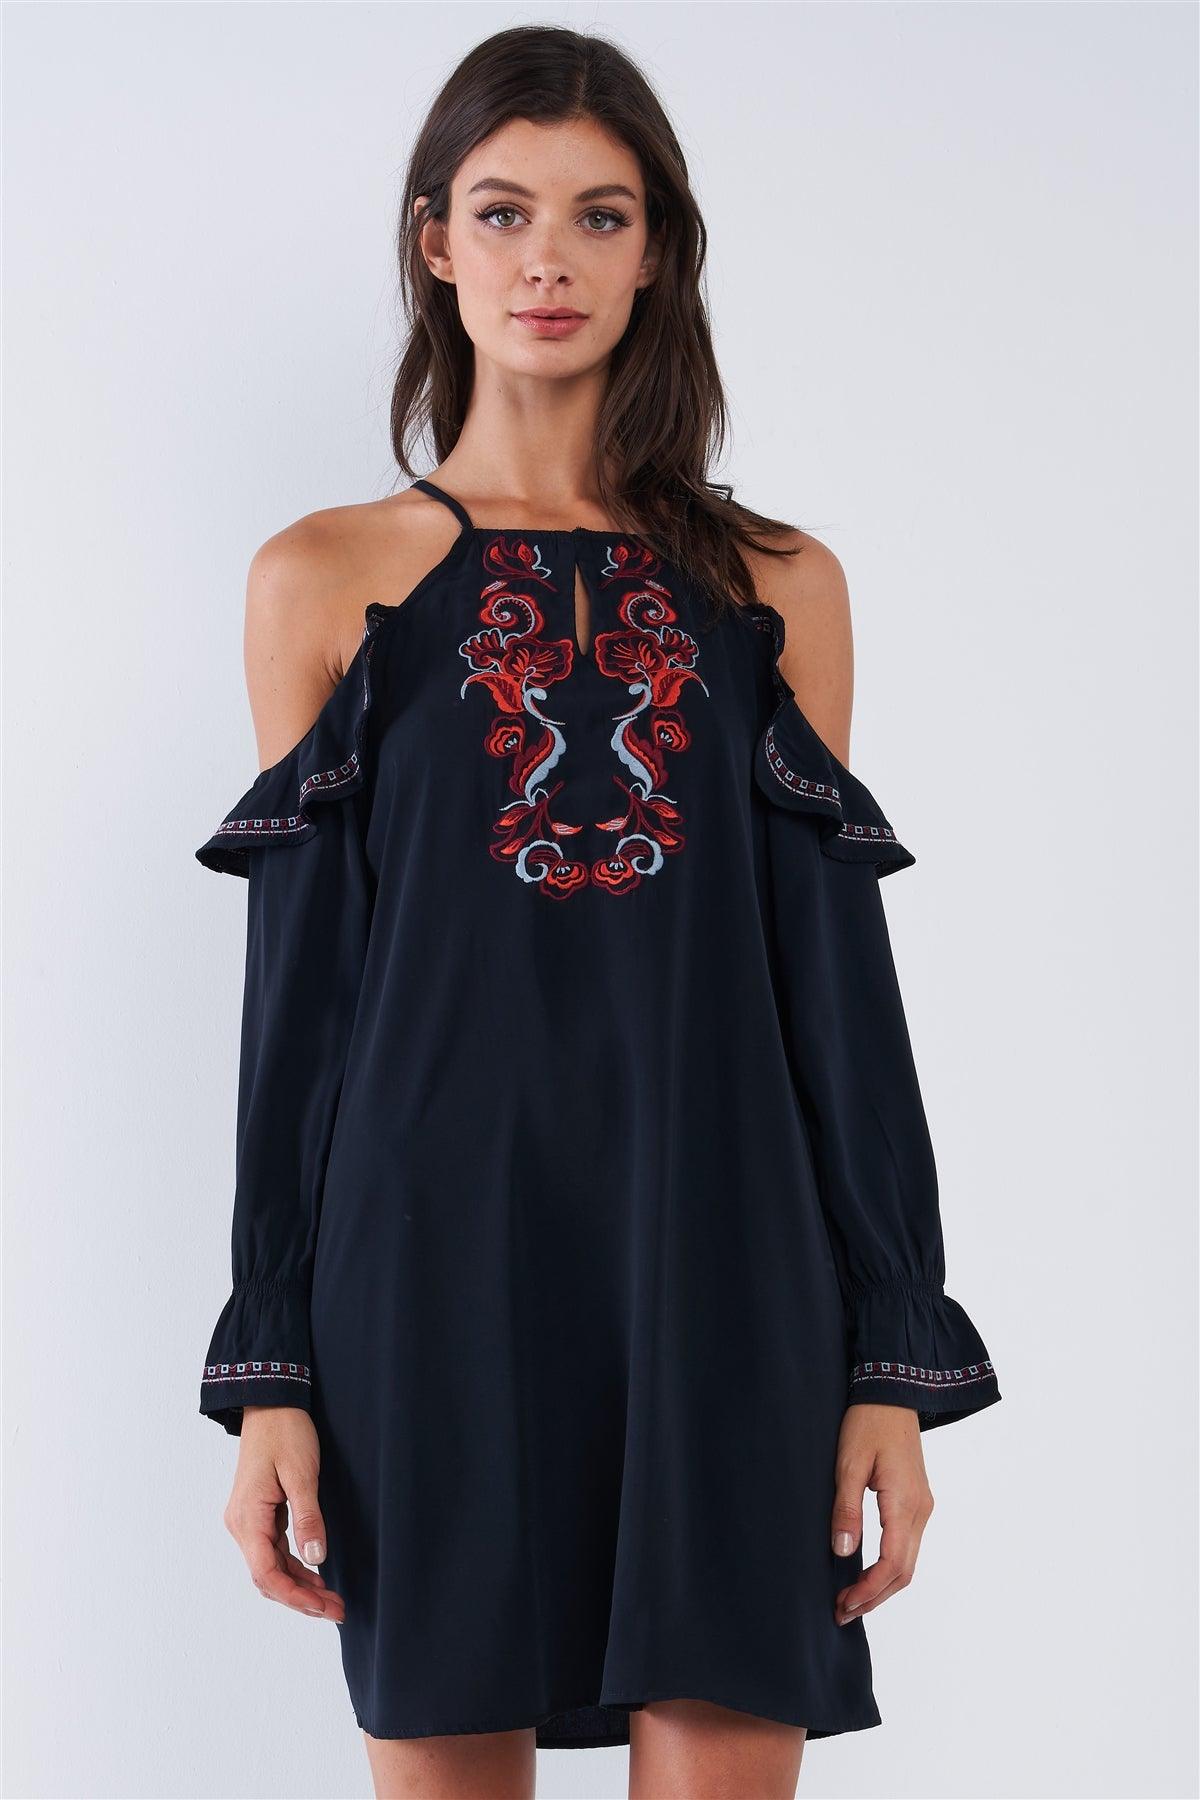 Black Boho Multicolor Traditional Slavic Inspired Floral Embroidery Loose Fit Ruffle Off-The-Shoulder Long Sleeve Mini Dress /1-2-2-1